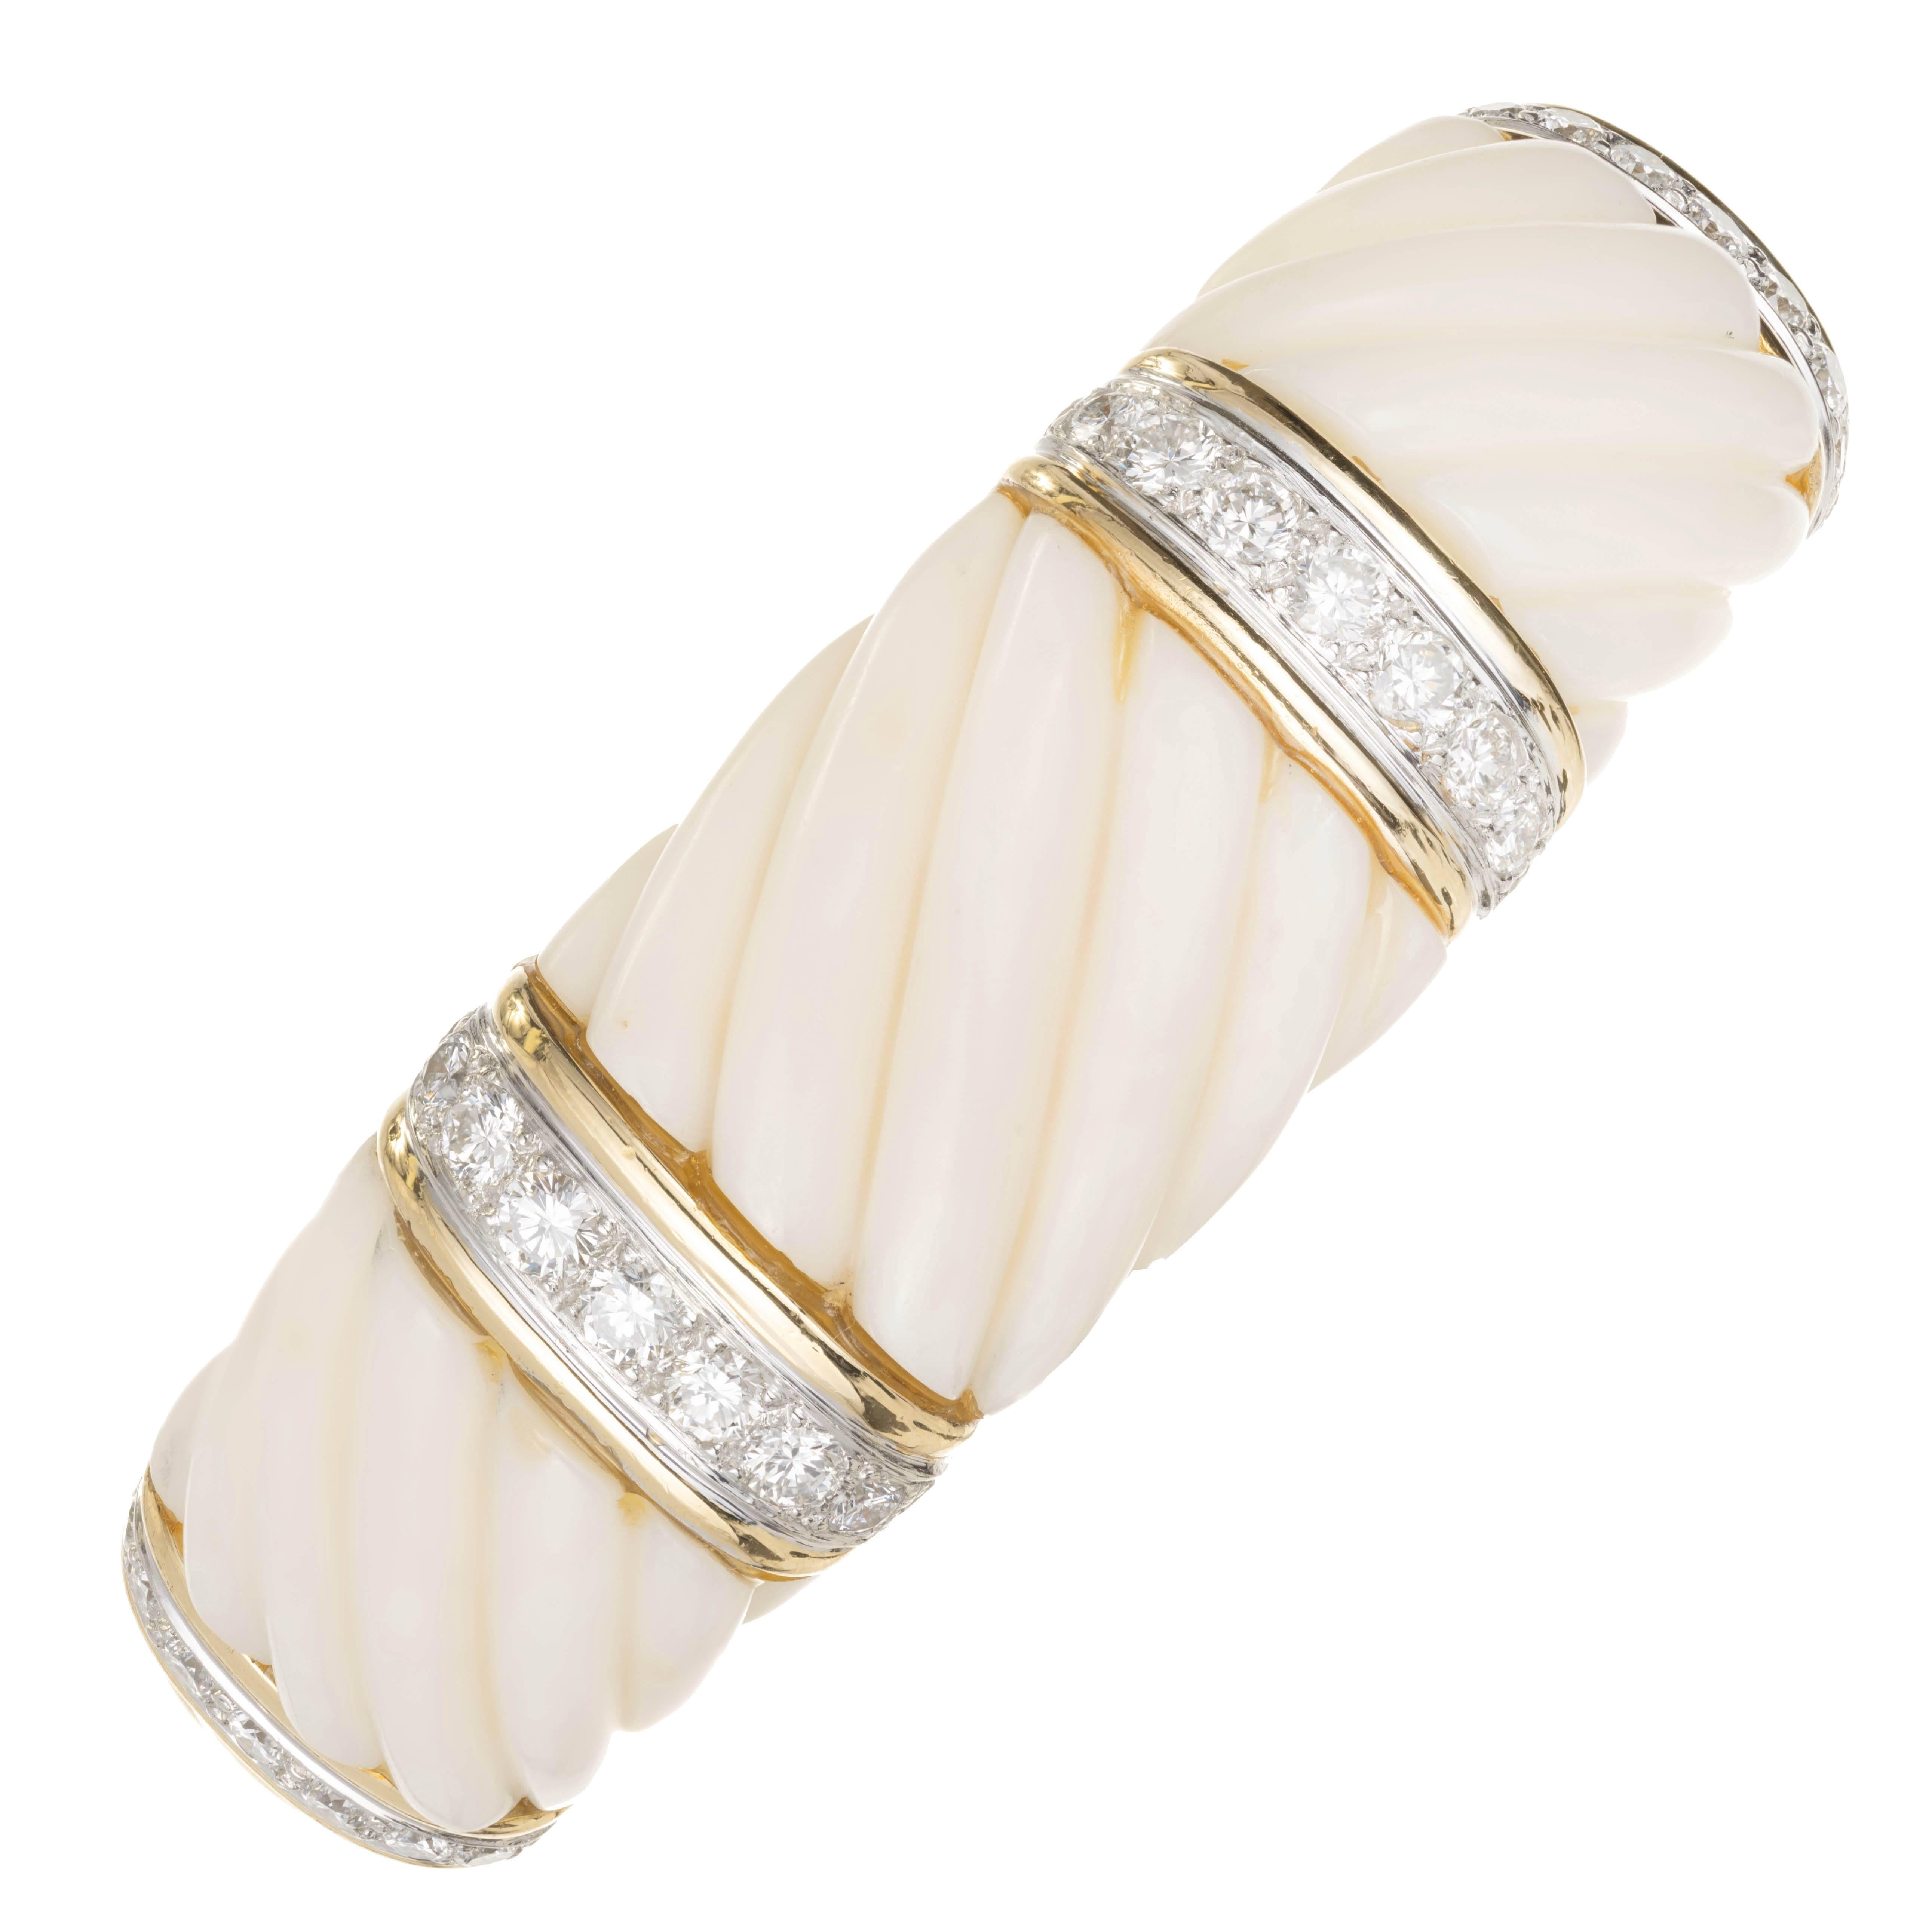 18k yellow gold open bangle with calcite and diamonds. Three sections of scalloped carver white calcite are separated by four rows of round brilliant cut diamonds set in 18k gold. The bottom of the open bangle is made of 18k yellow gold with the